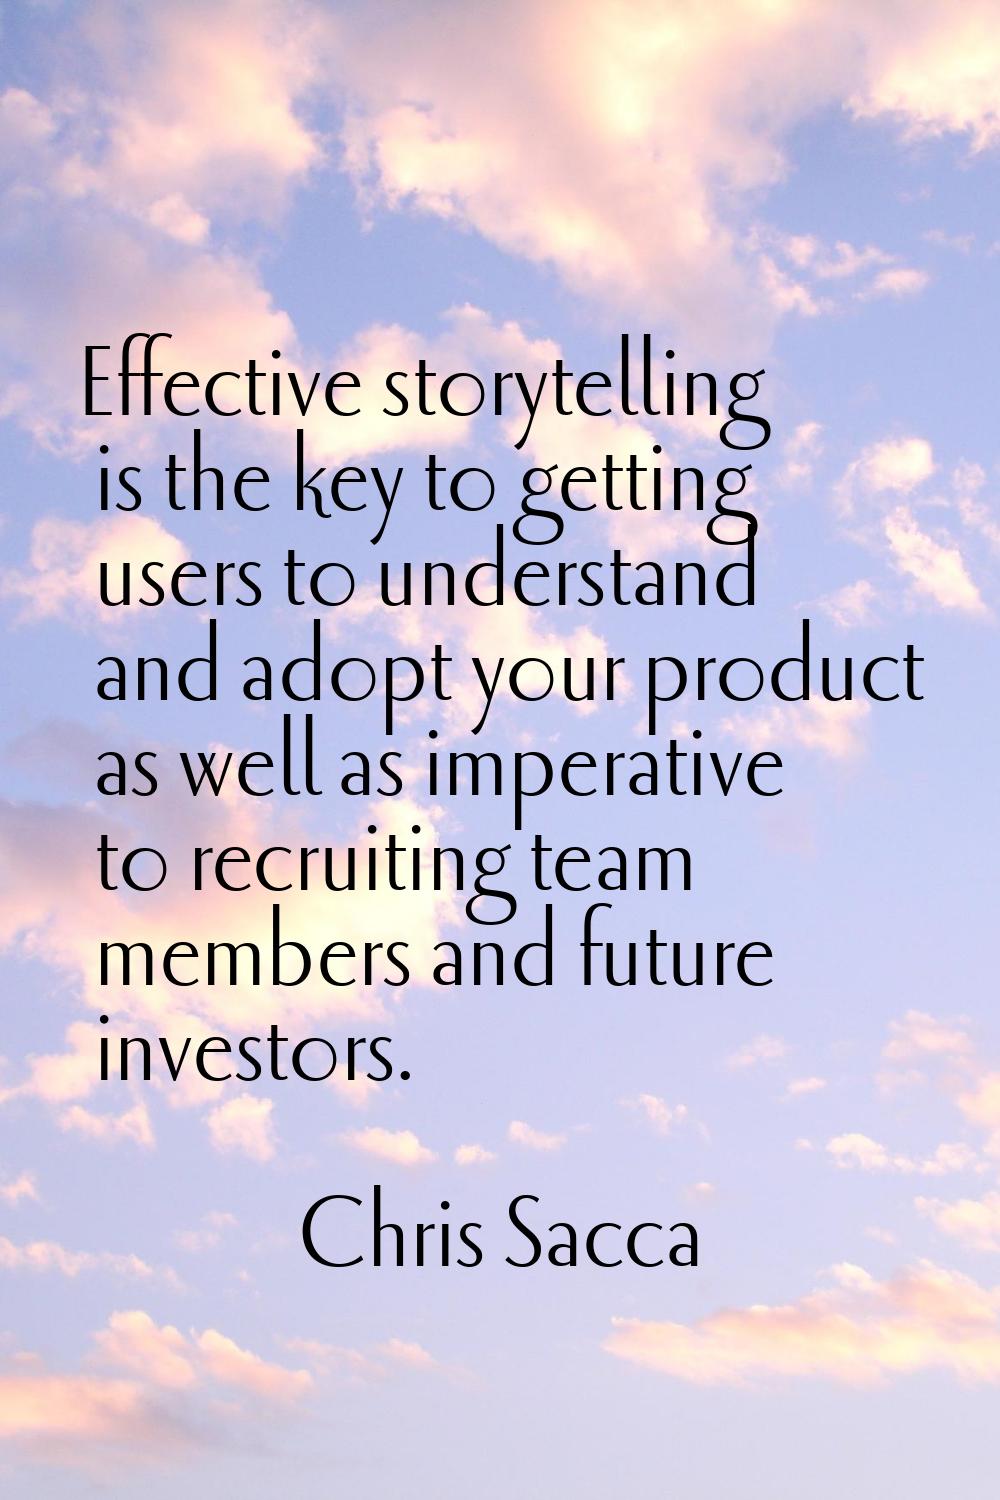 Effective storytelling is the key to getting users to understand and adopt your product as well as 